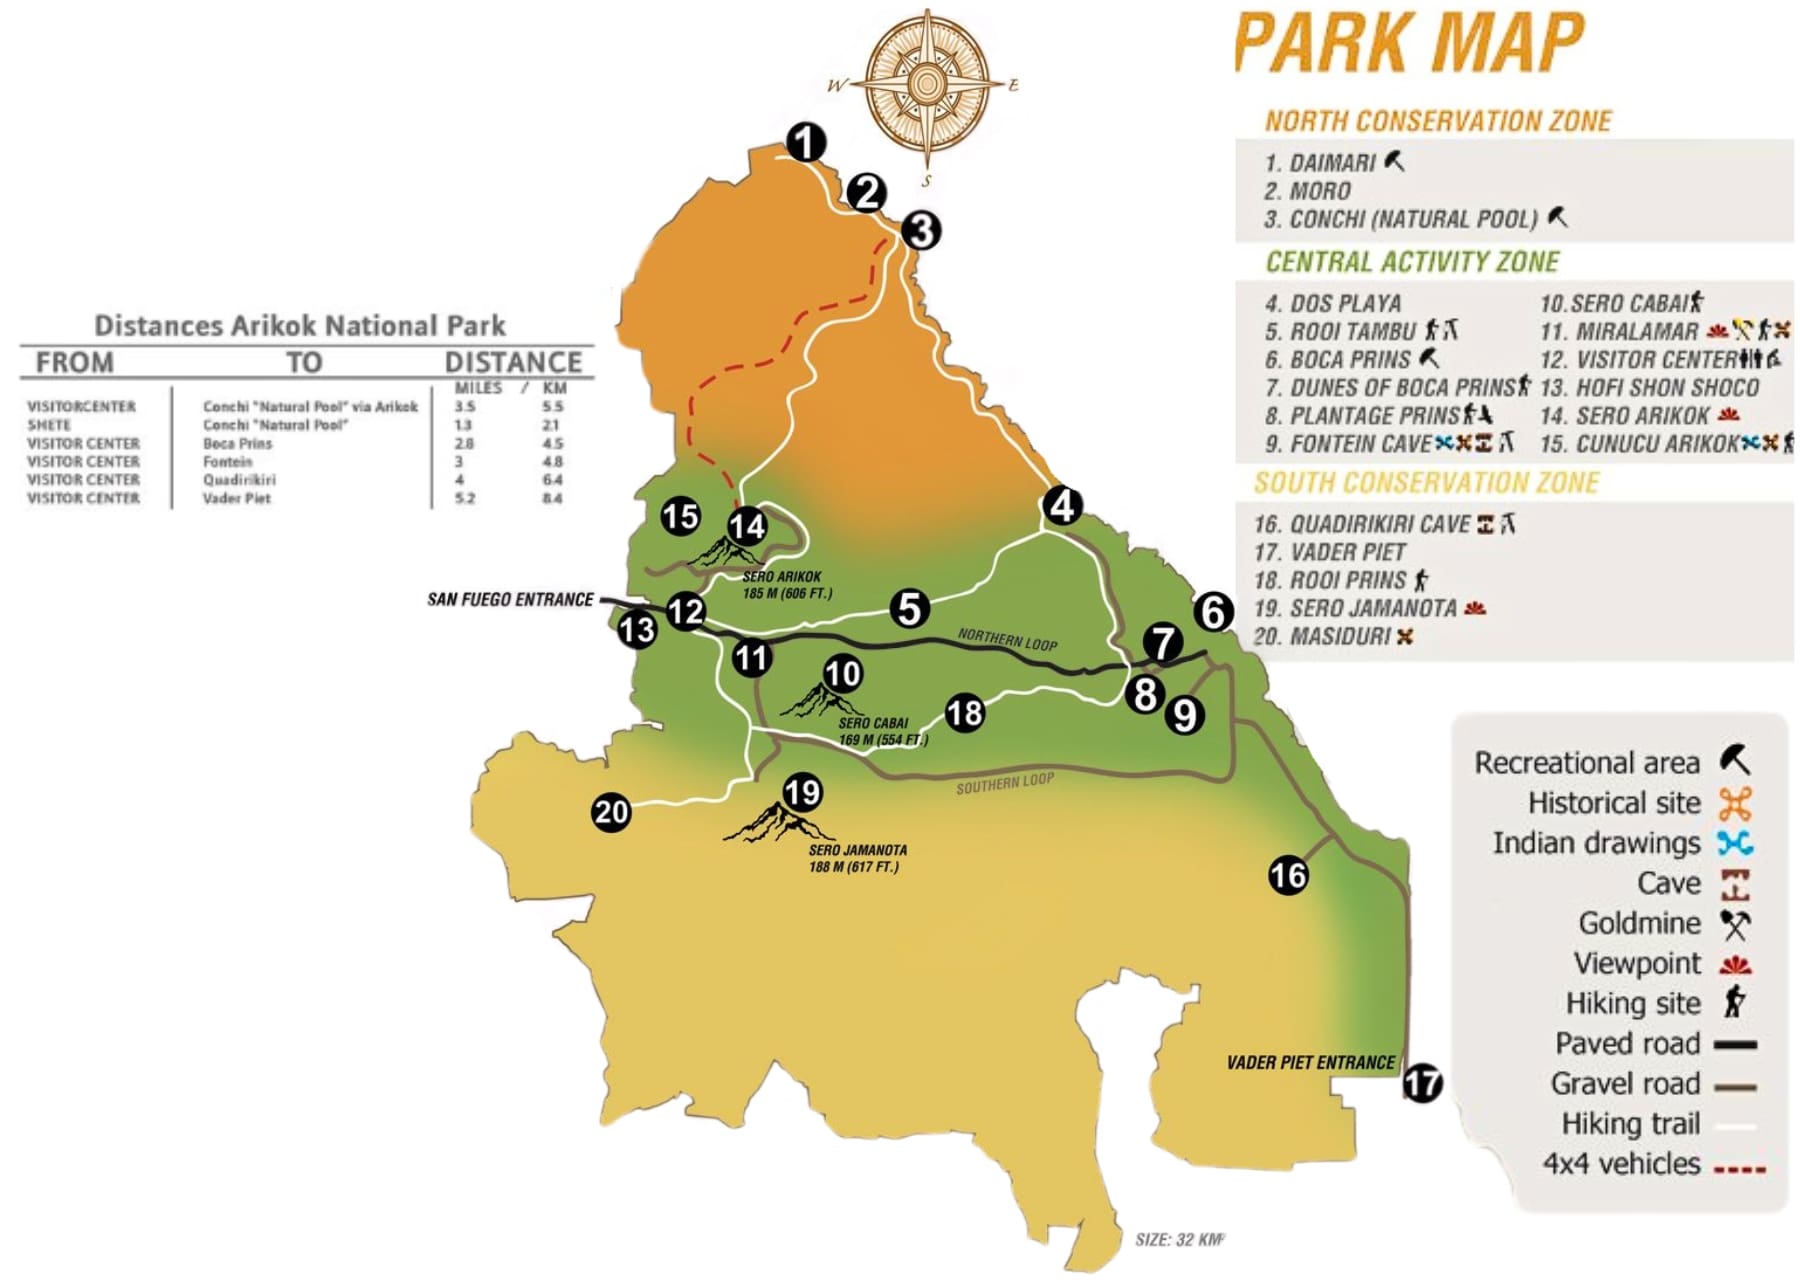 Map of Arikok National Park highlighting key attractions and trails.